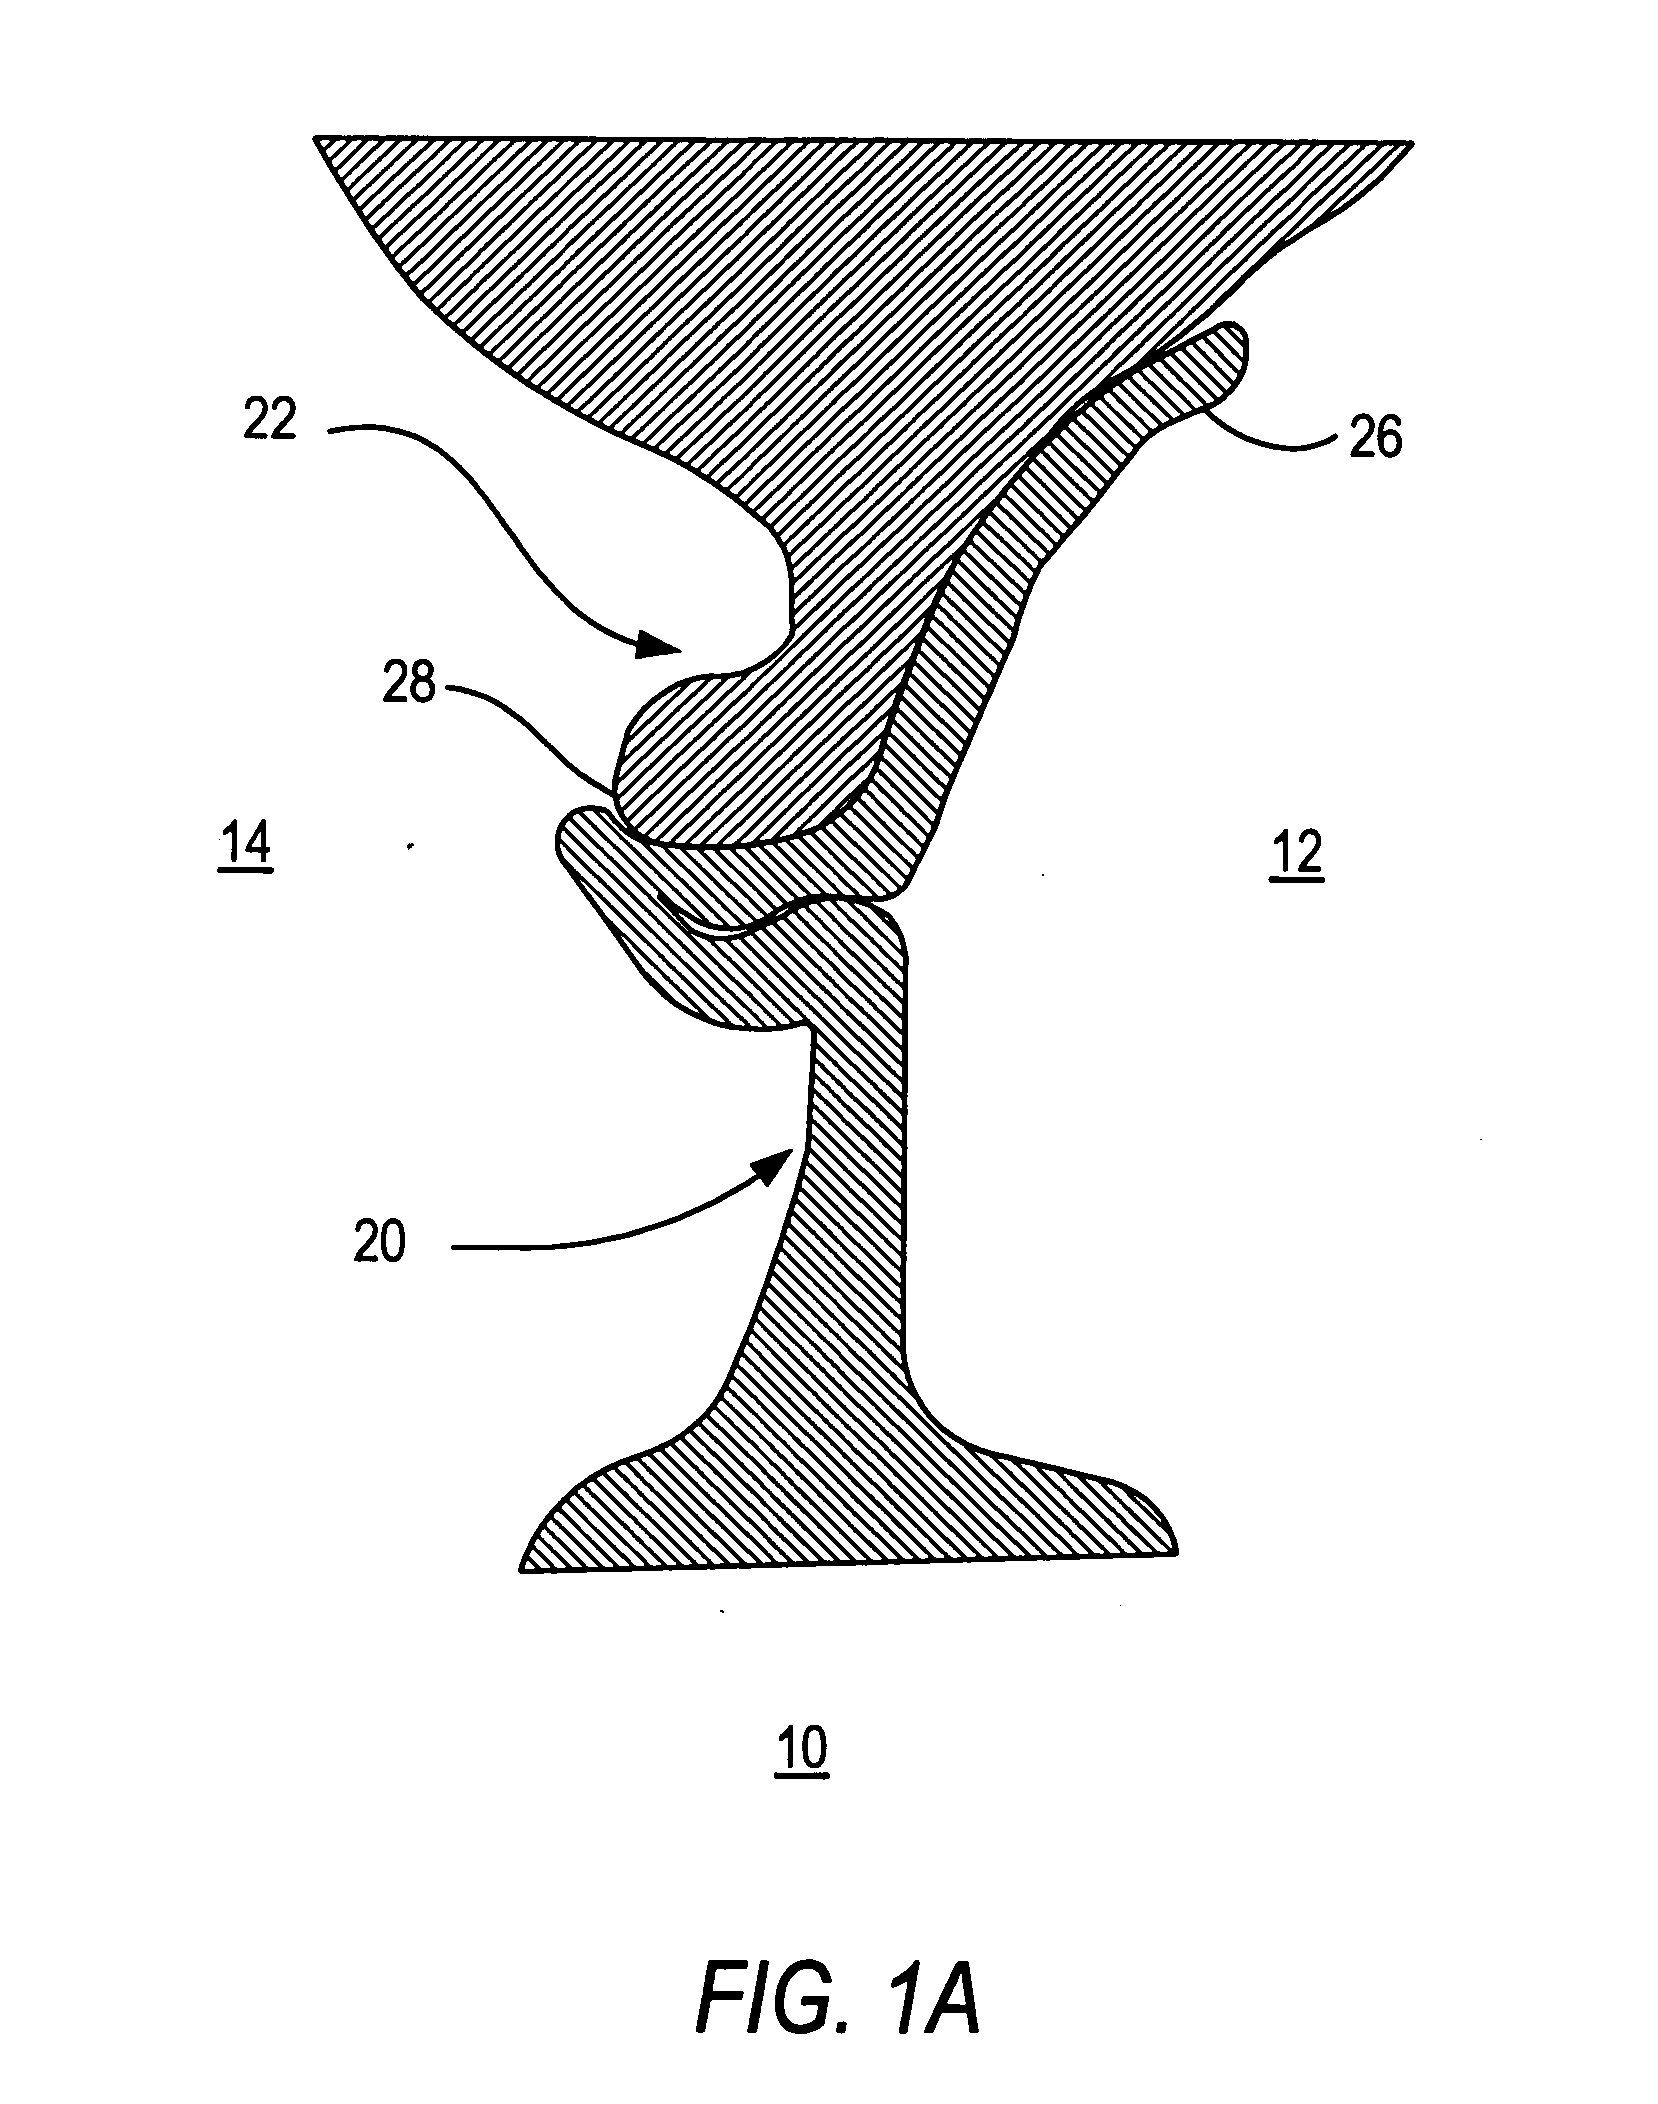 Apparatus and methods for tissue gathering and securing